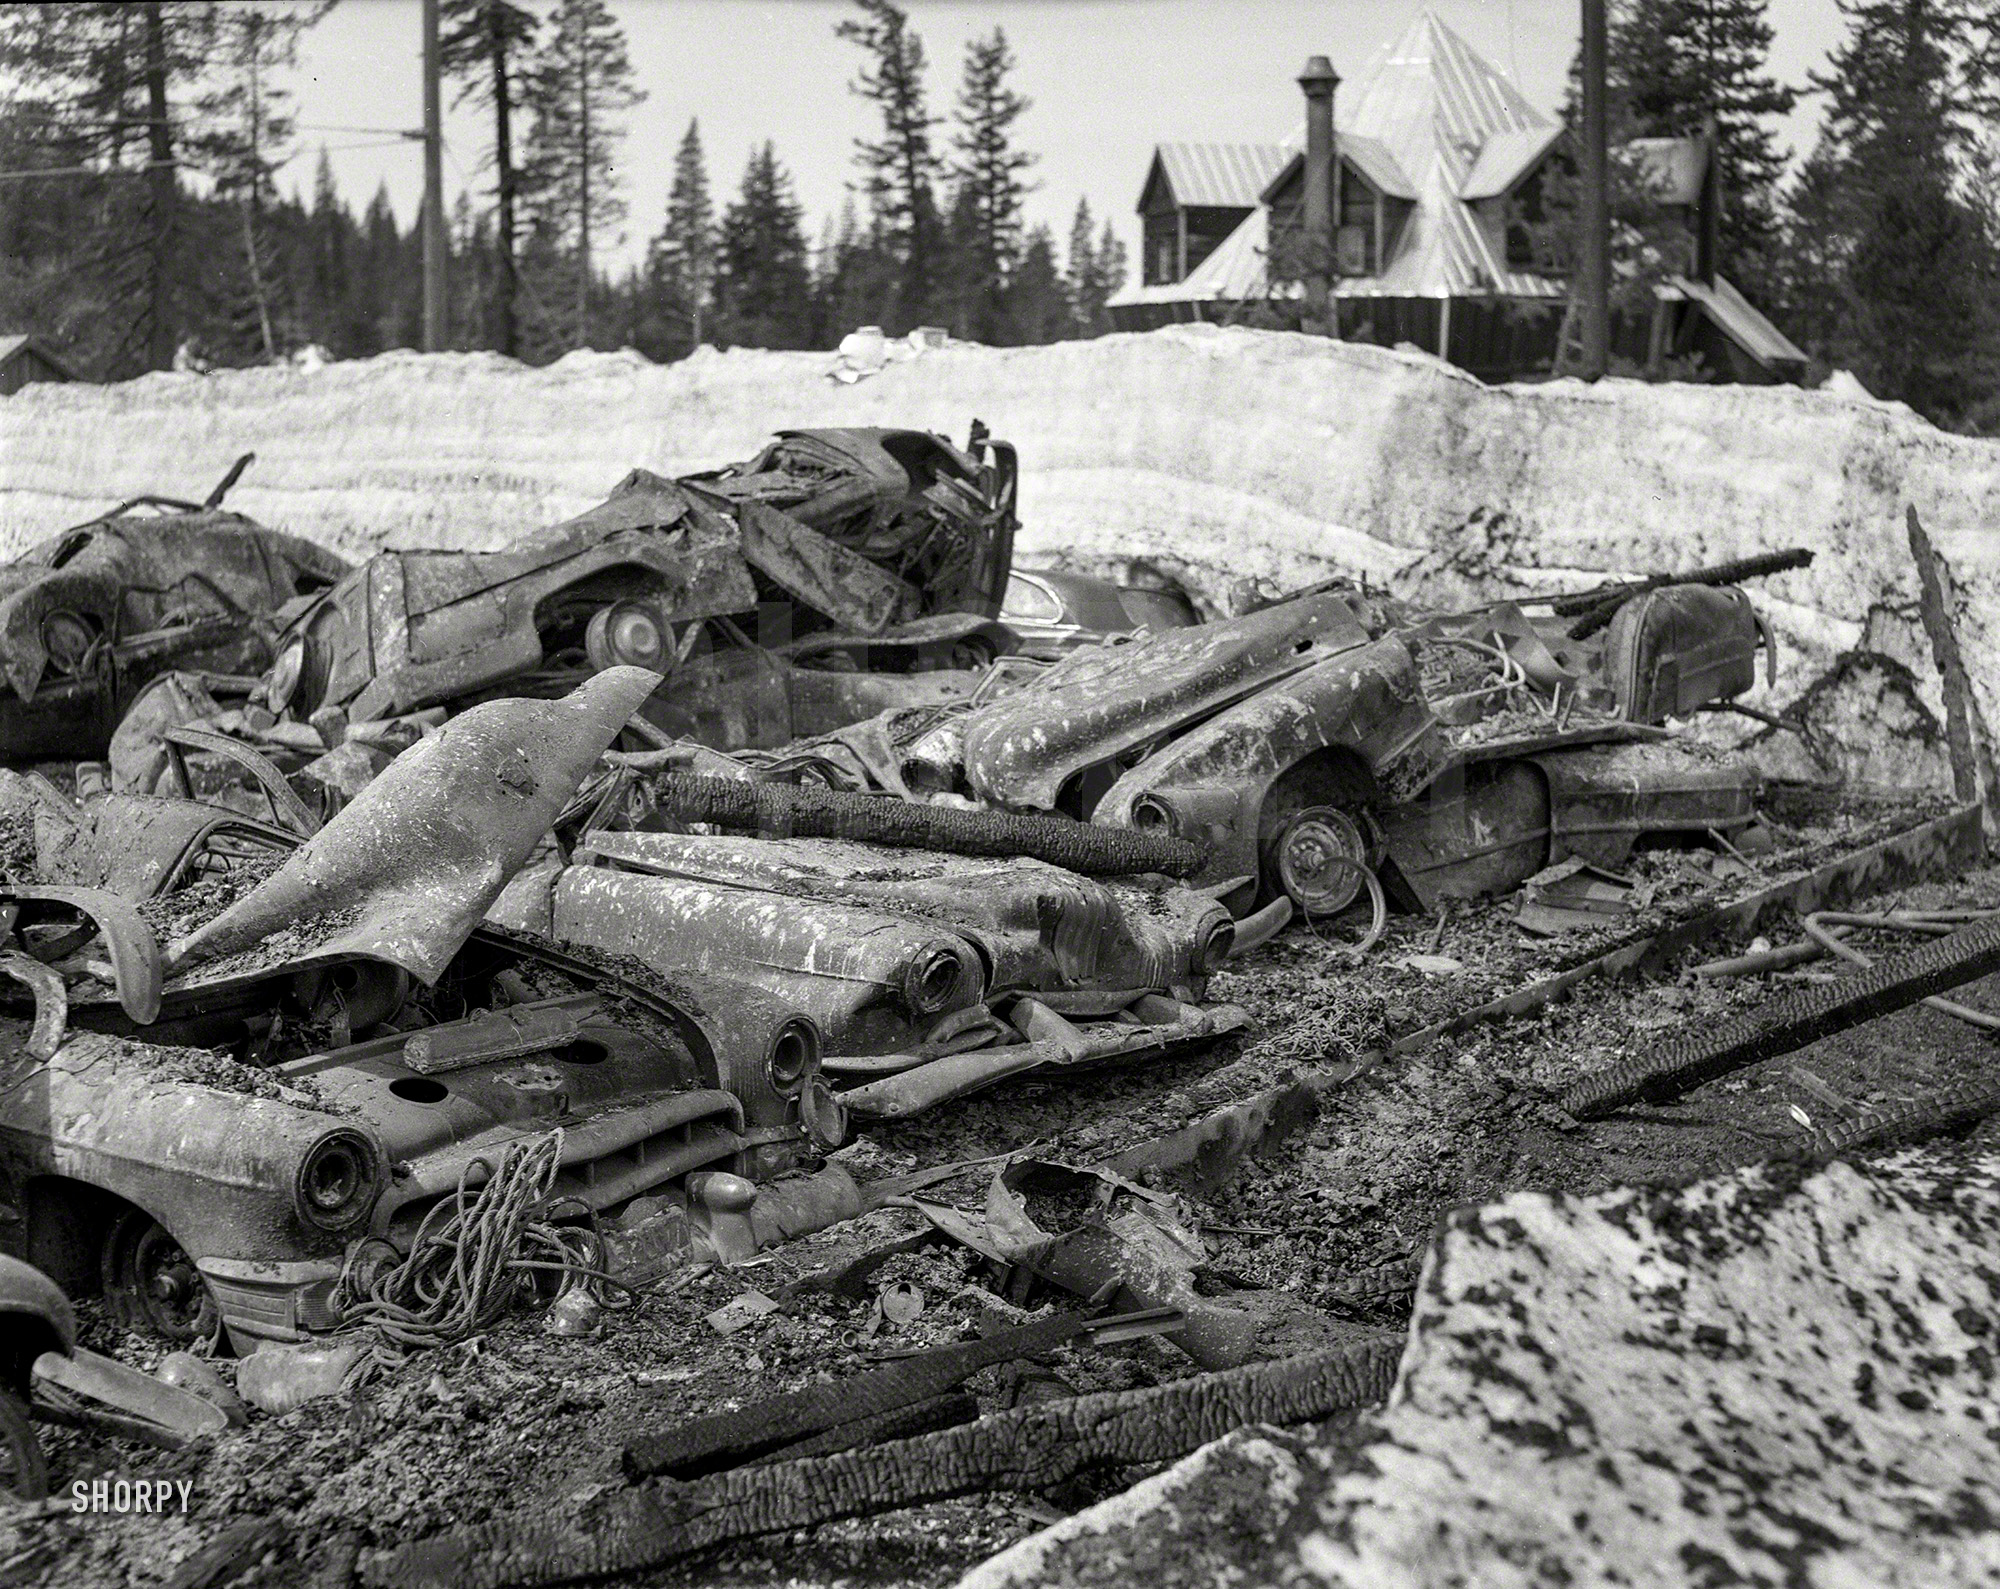 From mid-1950s California, the aftermath of an epic carbecue in what looks to be Sierra ski country. Please present your claim ticket to the valet! 4x5 inch acetate negative from the Shorpy News Photo Archive. View full size.